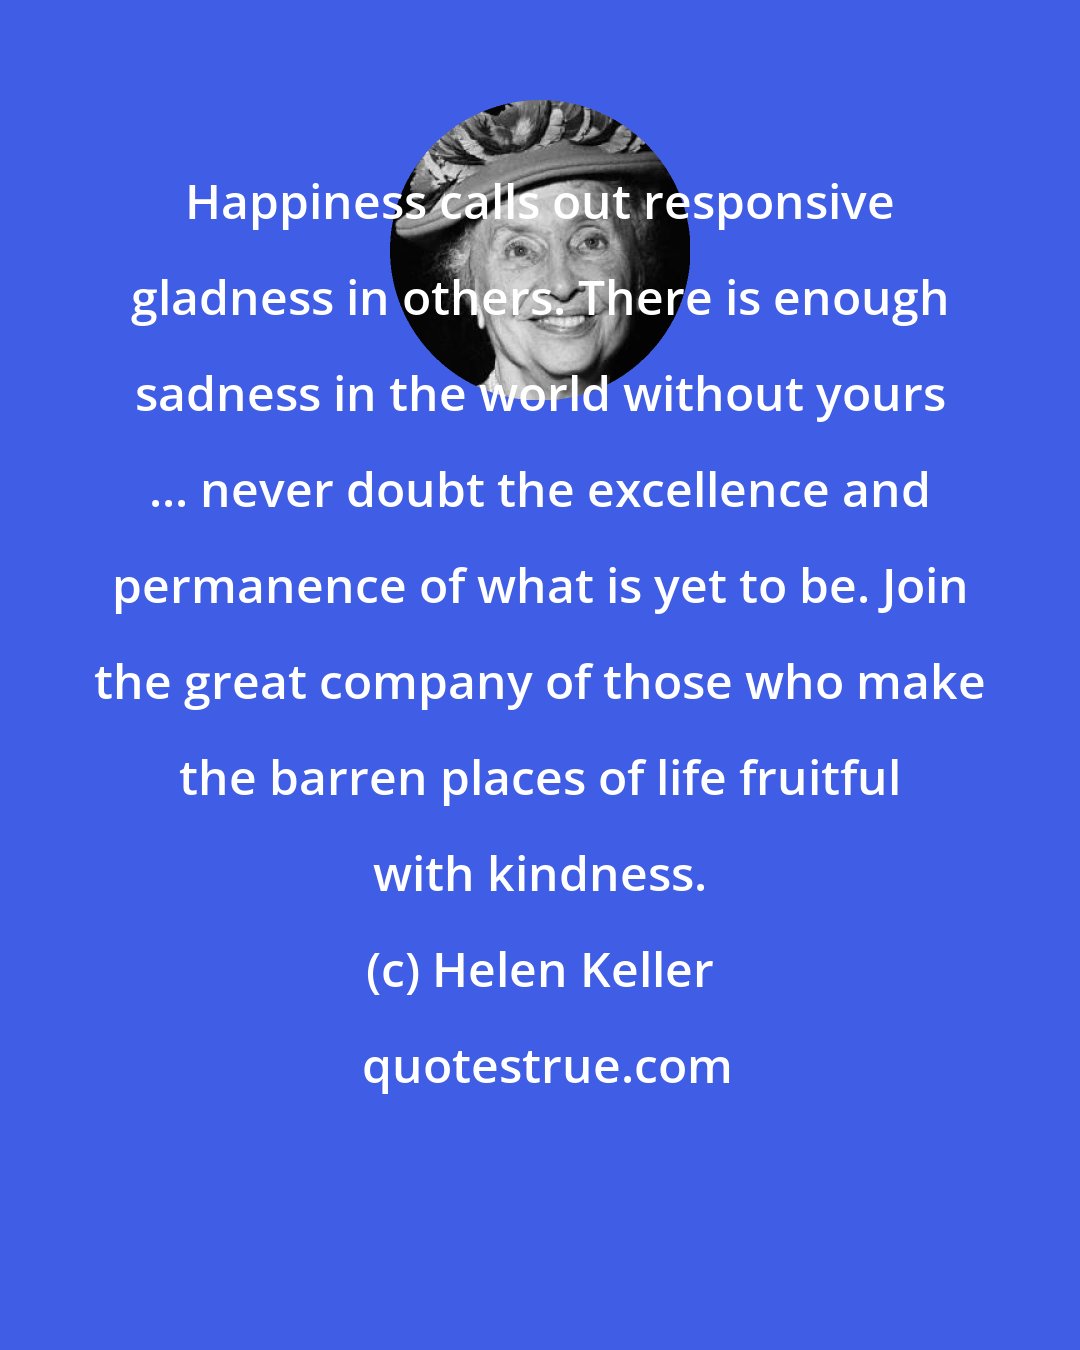 Helen Keller: Happiness calls out responsive gladness in others. There is enough sadness in the world without yours ... never doubt the excellence and permanence of what is yet to be. Join the great company of those who make the barren places of life fruitful with kindness.